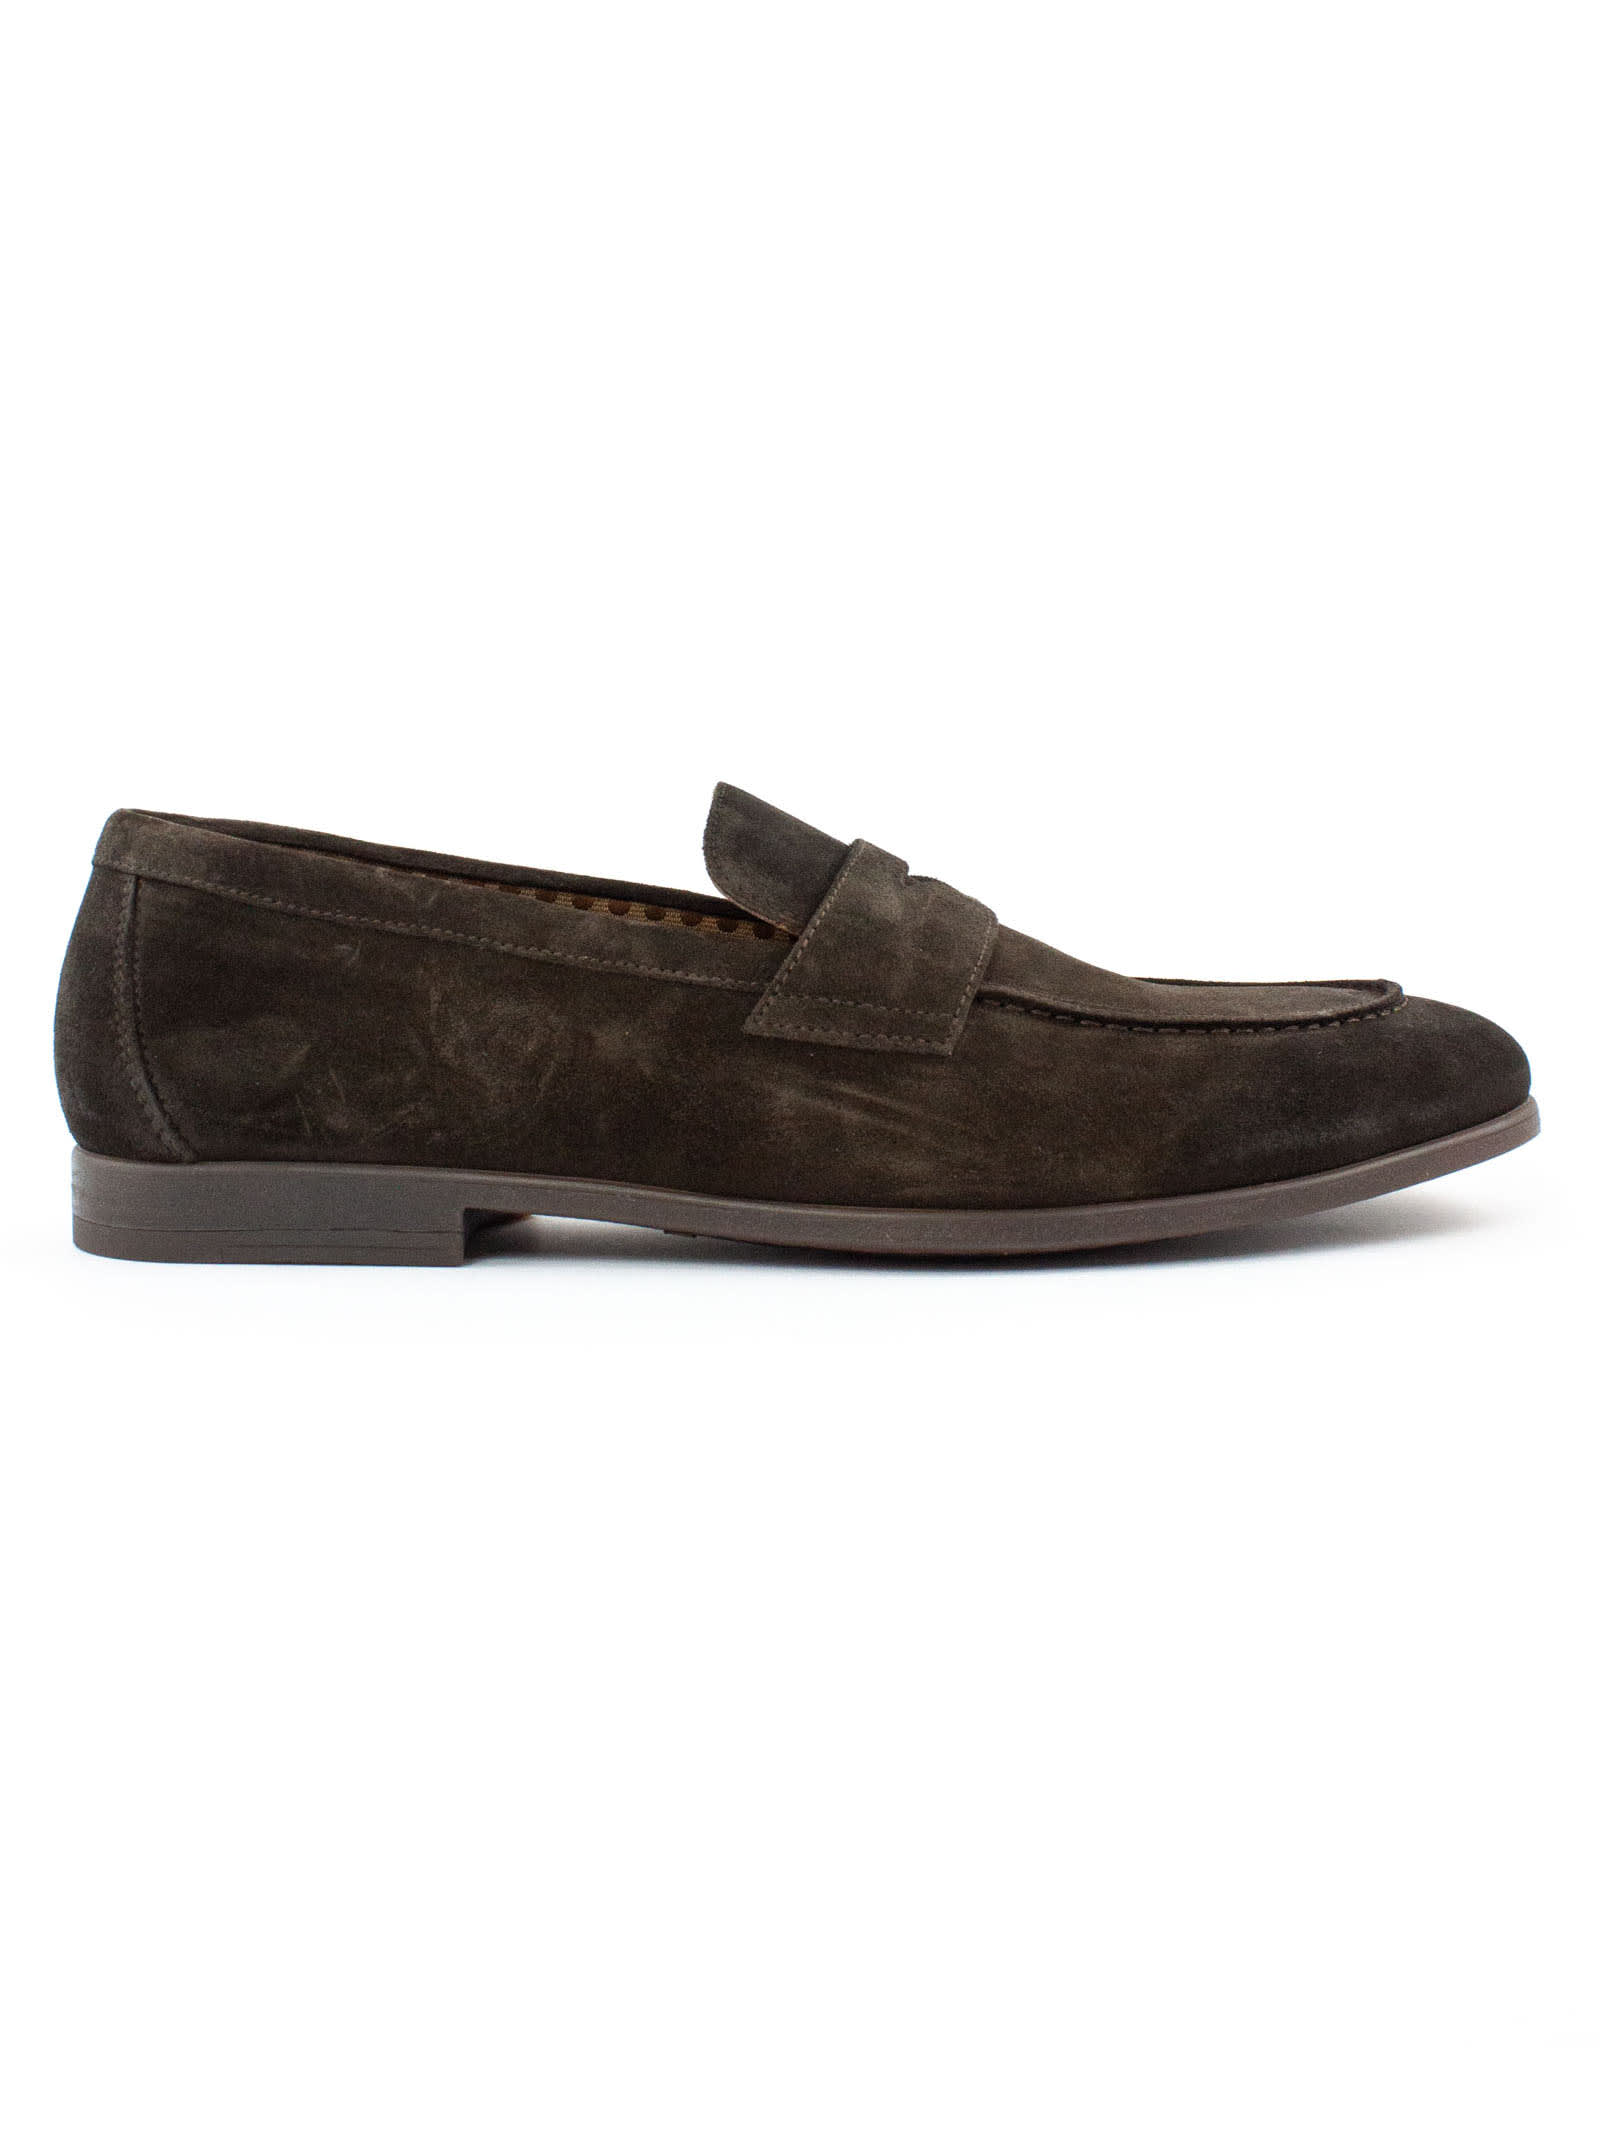 Doucal's LOAFER IN DARK BROWN SUEDE